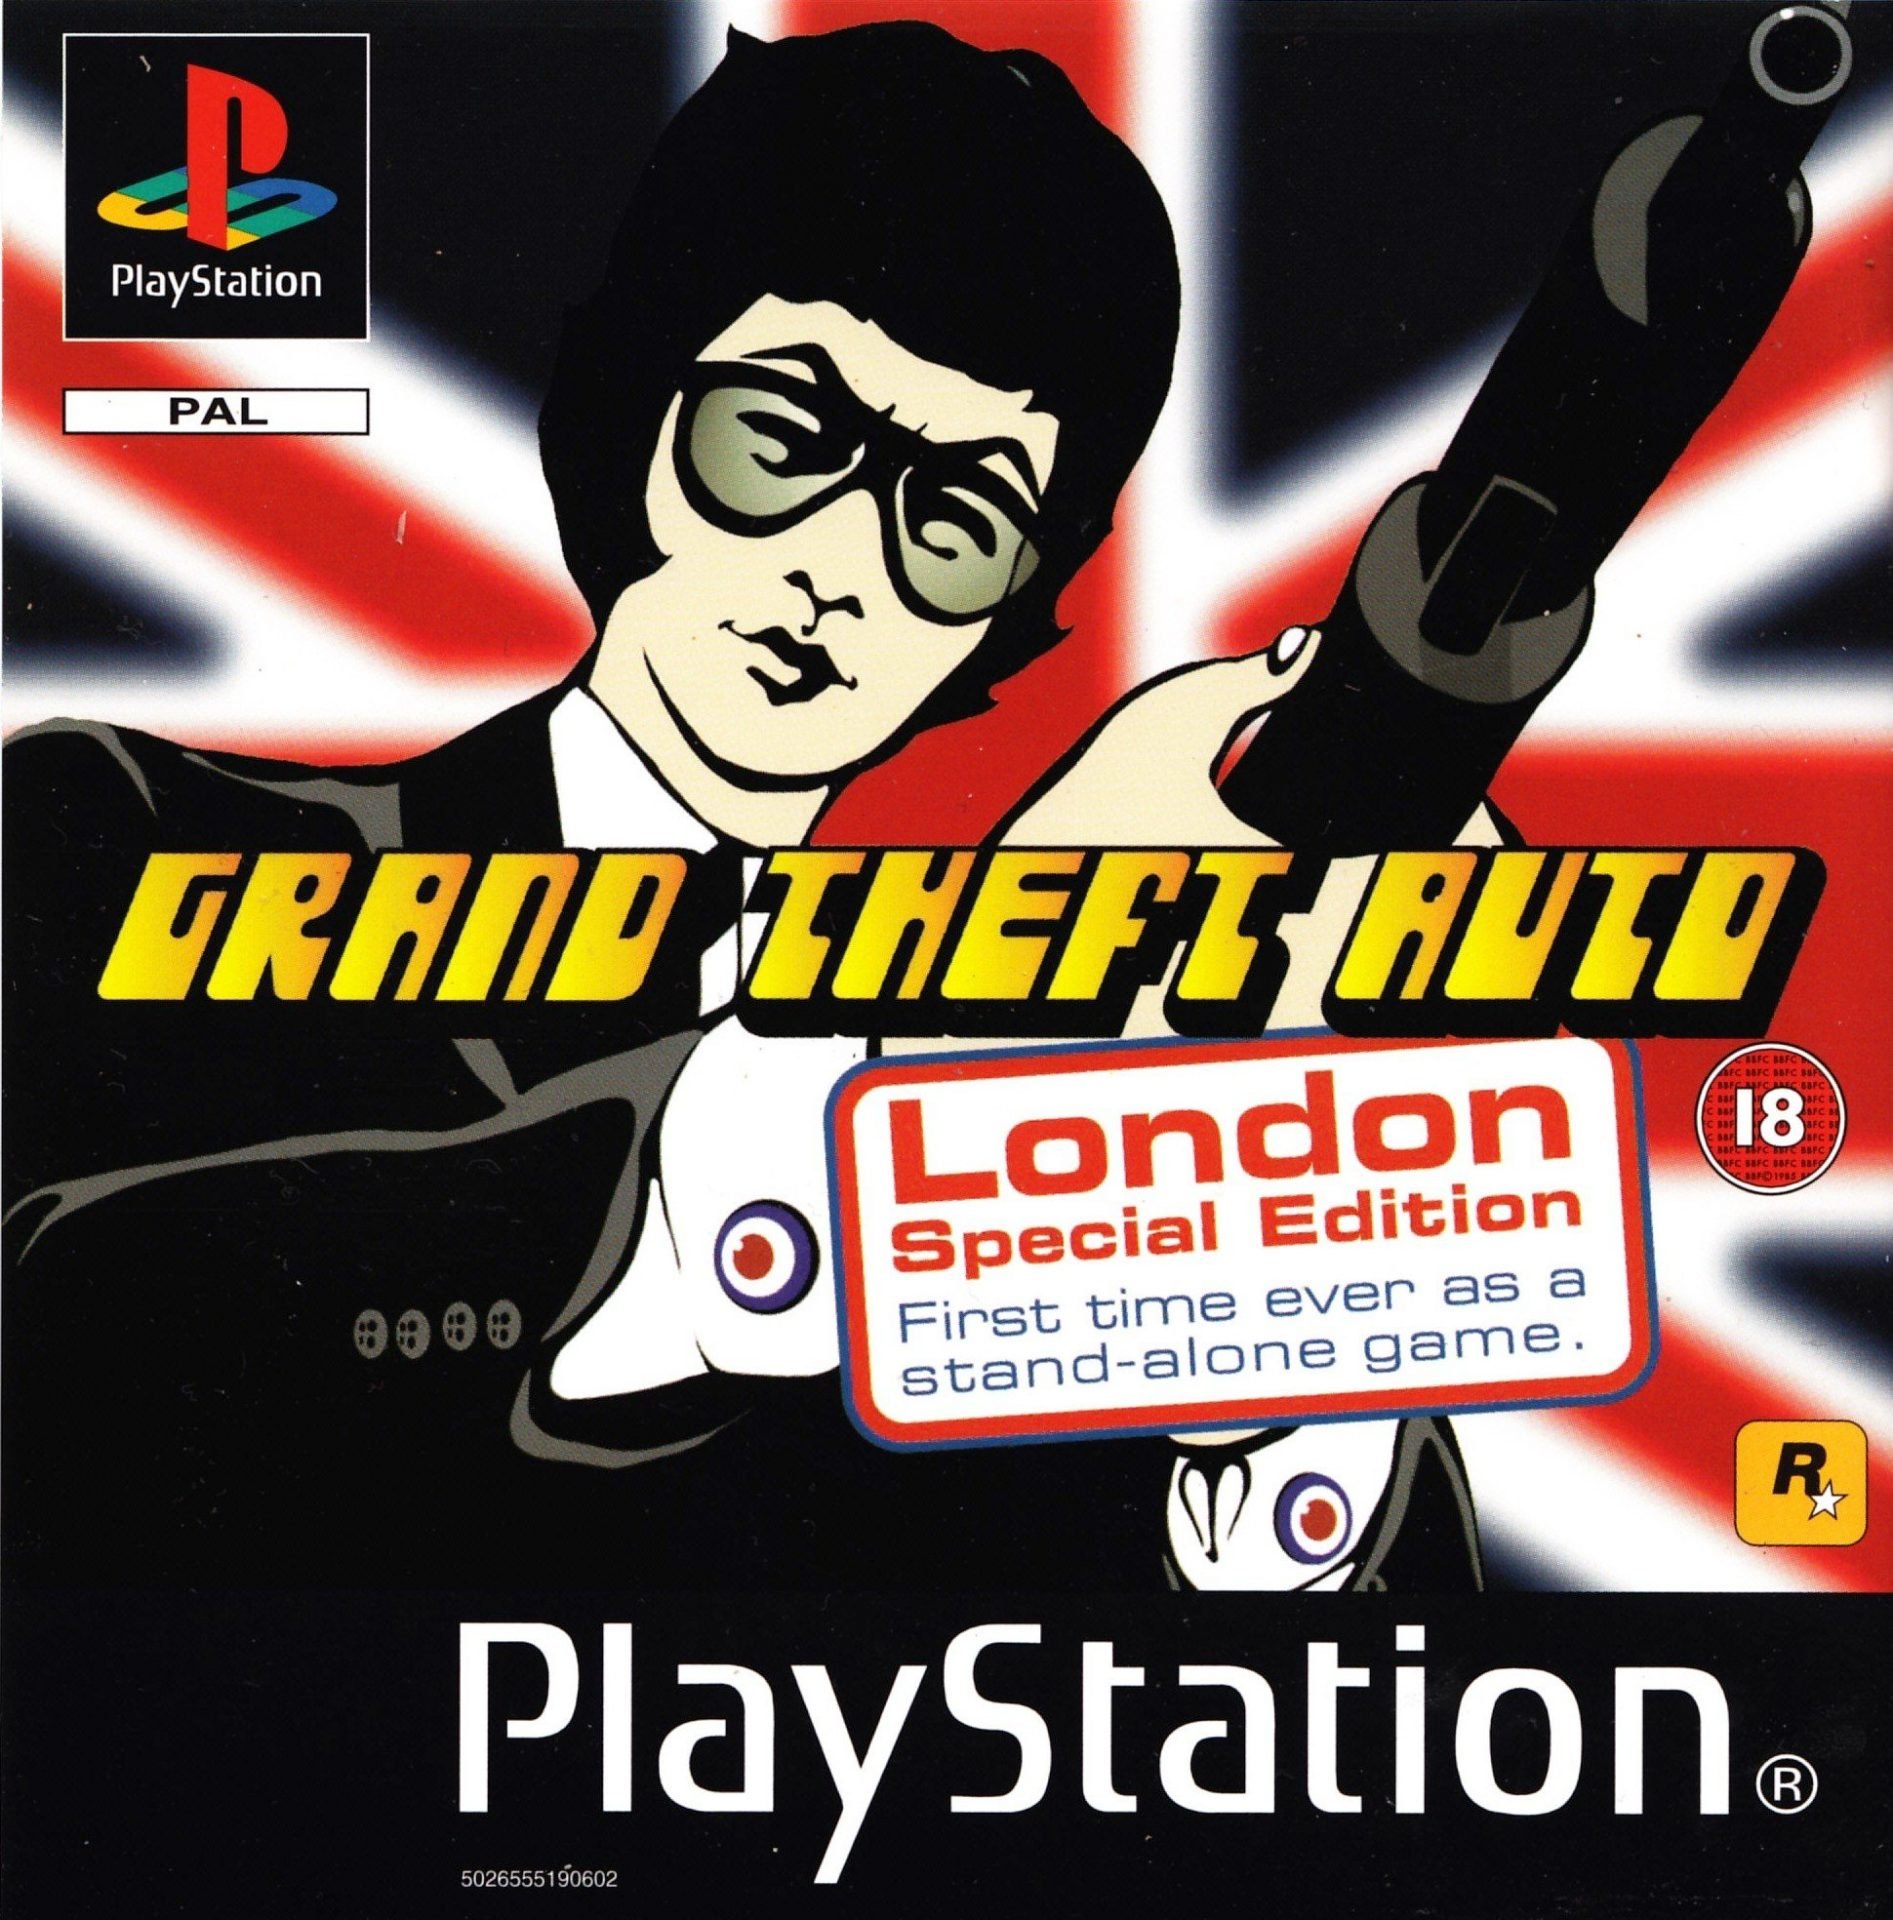 Grand Theft Auto: London (Special Edition)